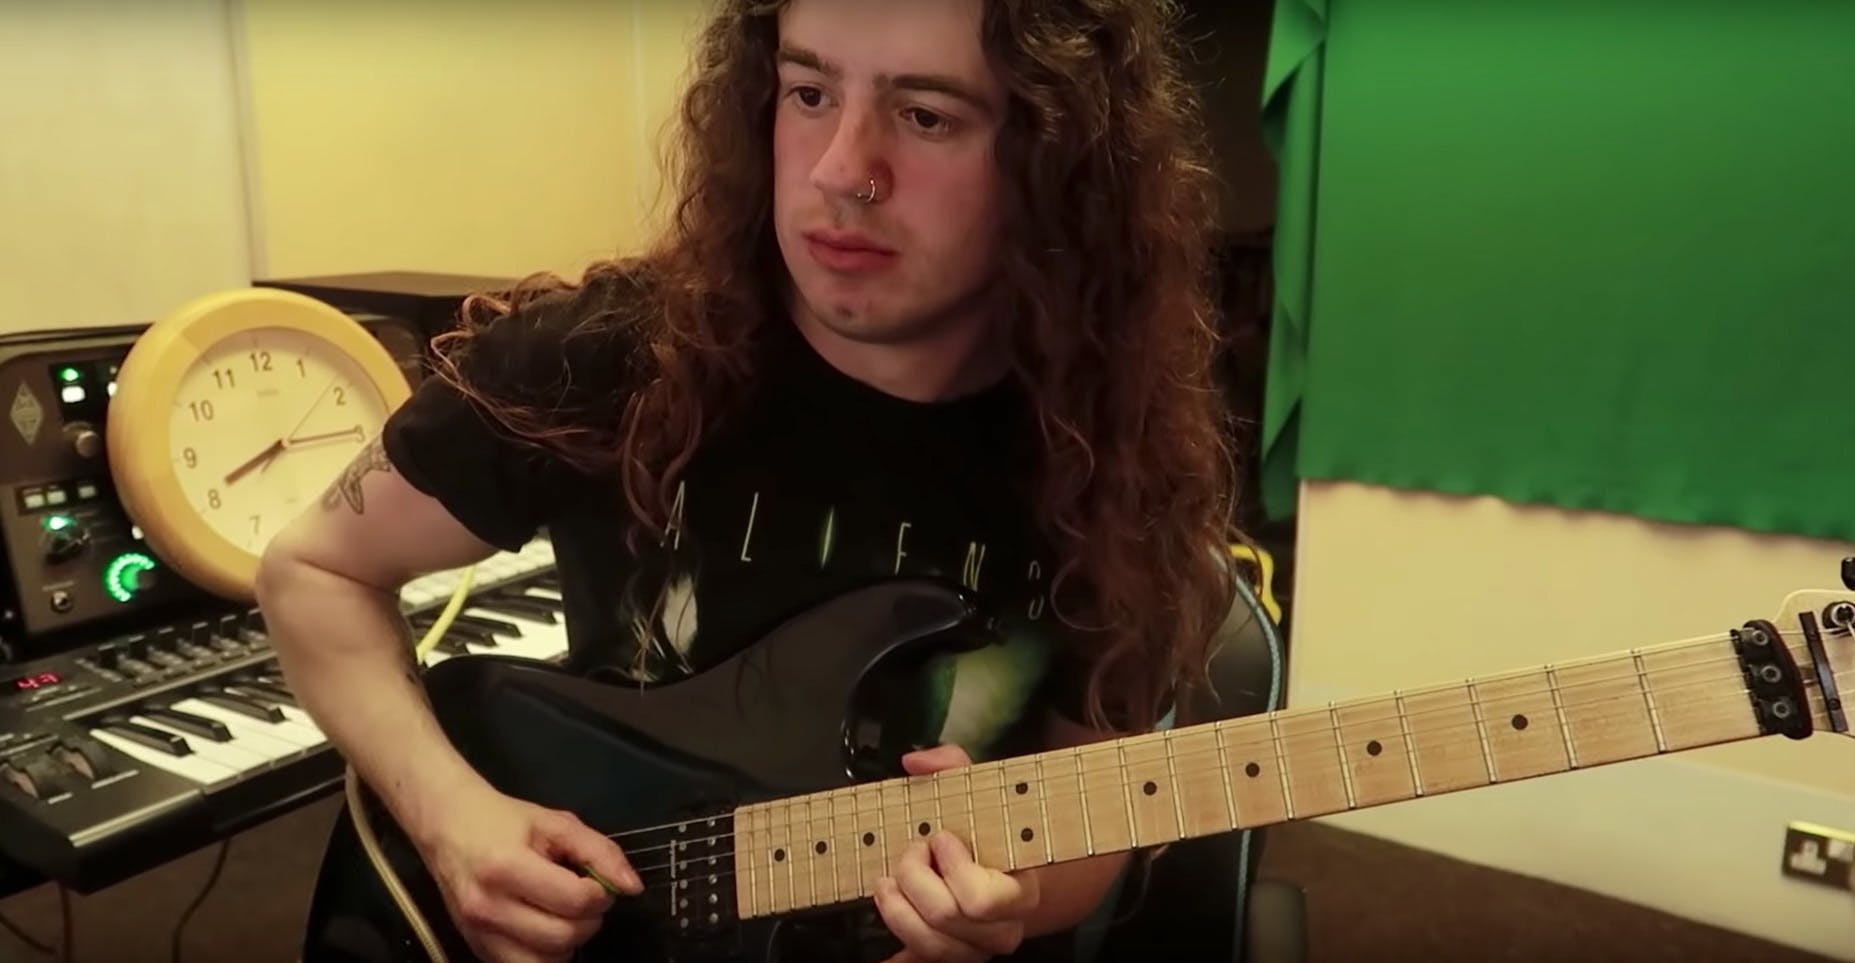 Watch This Guy Play Metallica's Master Of Puppets Solo Backwards